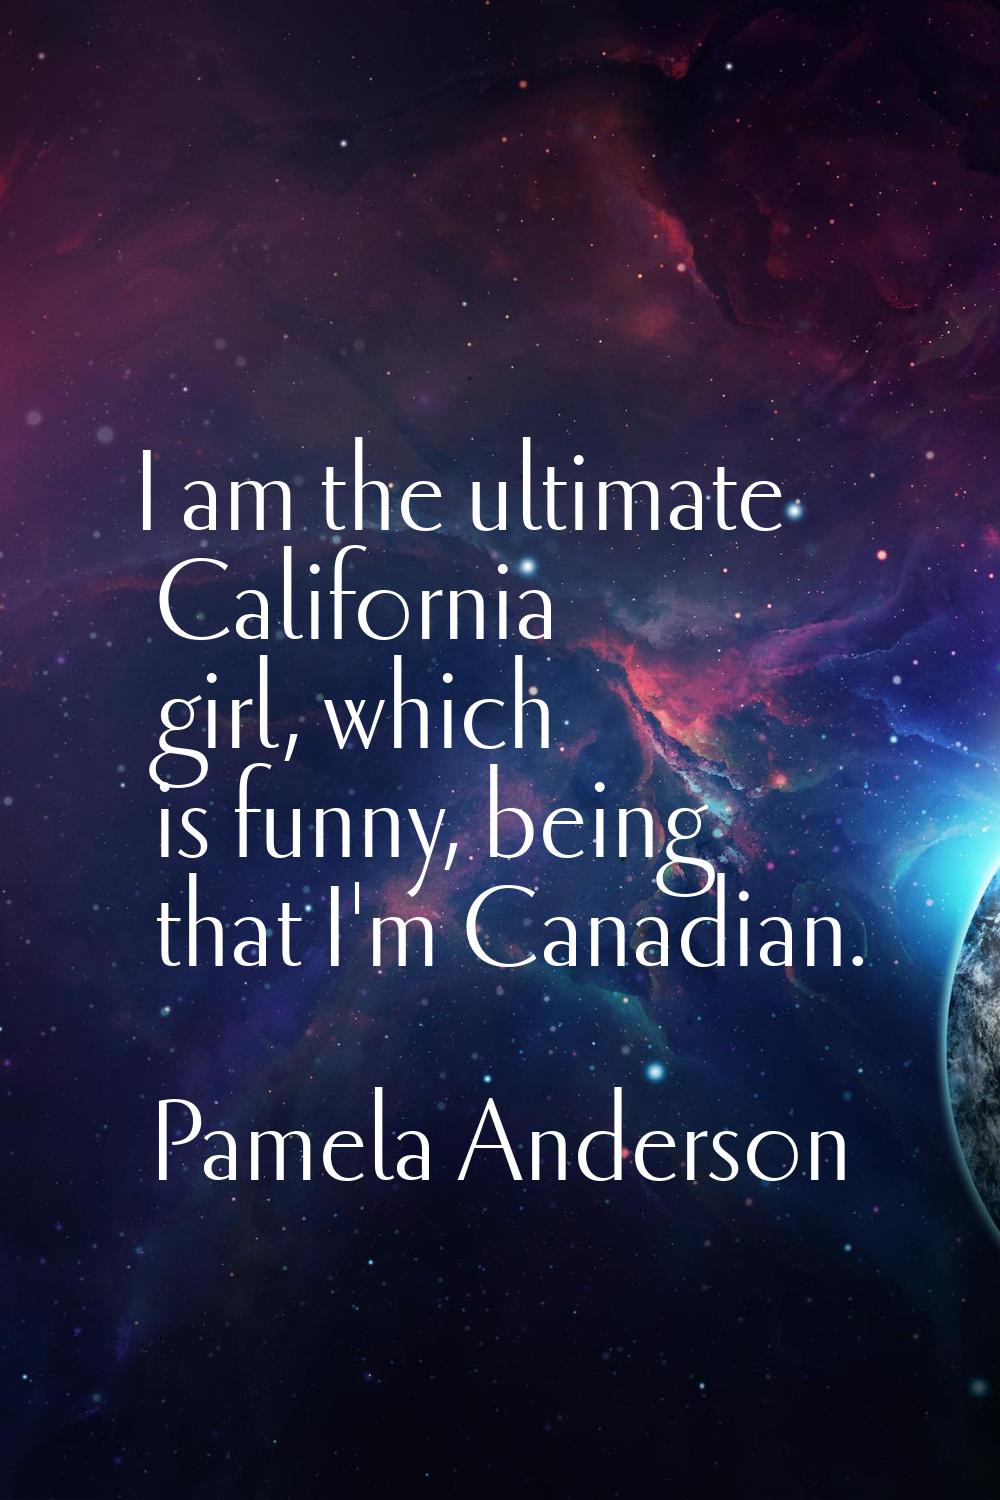 I am the ultimate California girl, which is funny, being that I'm Canadian.